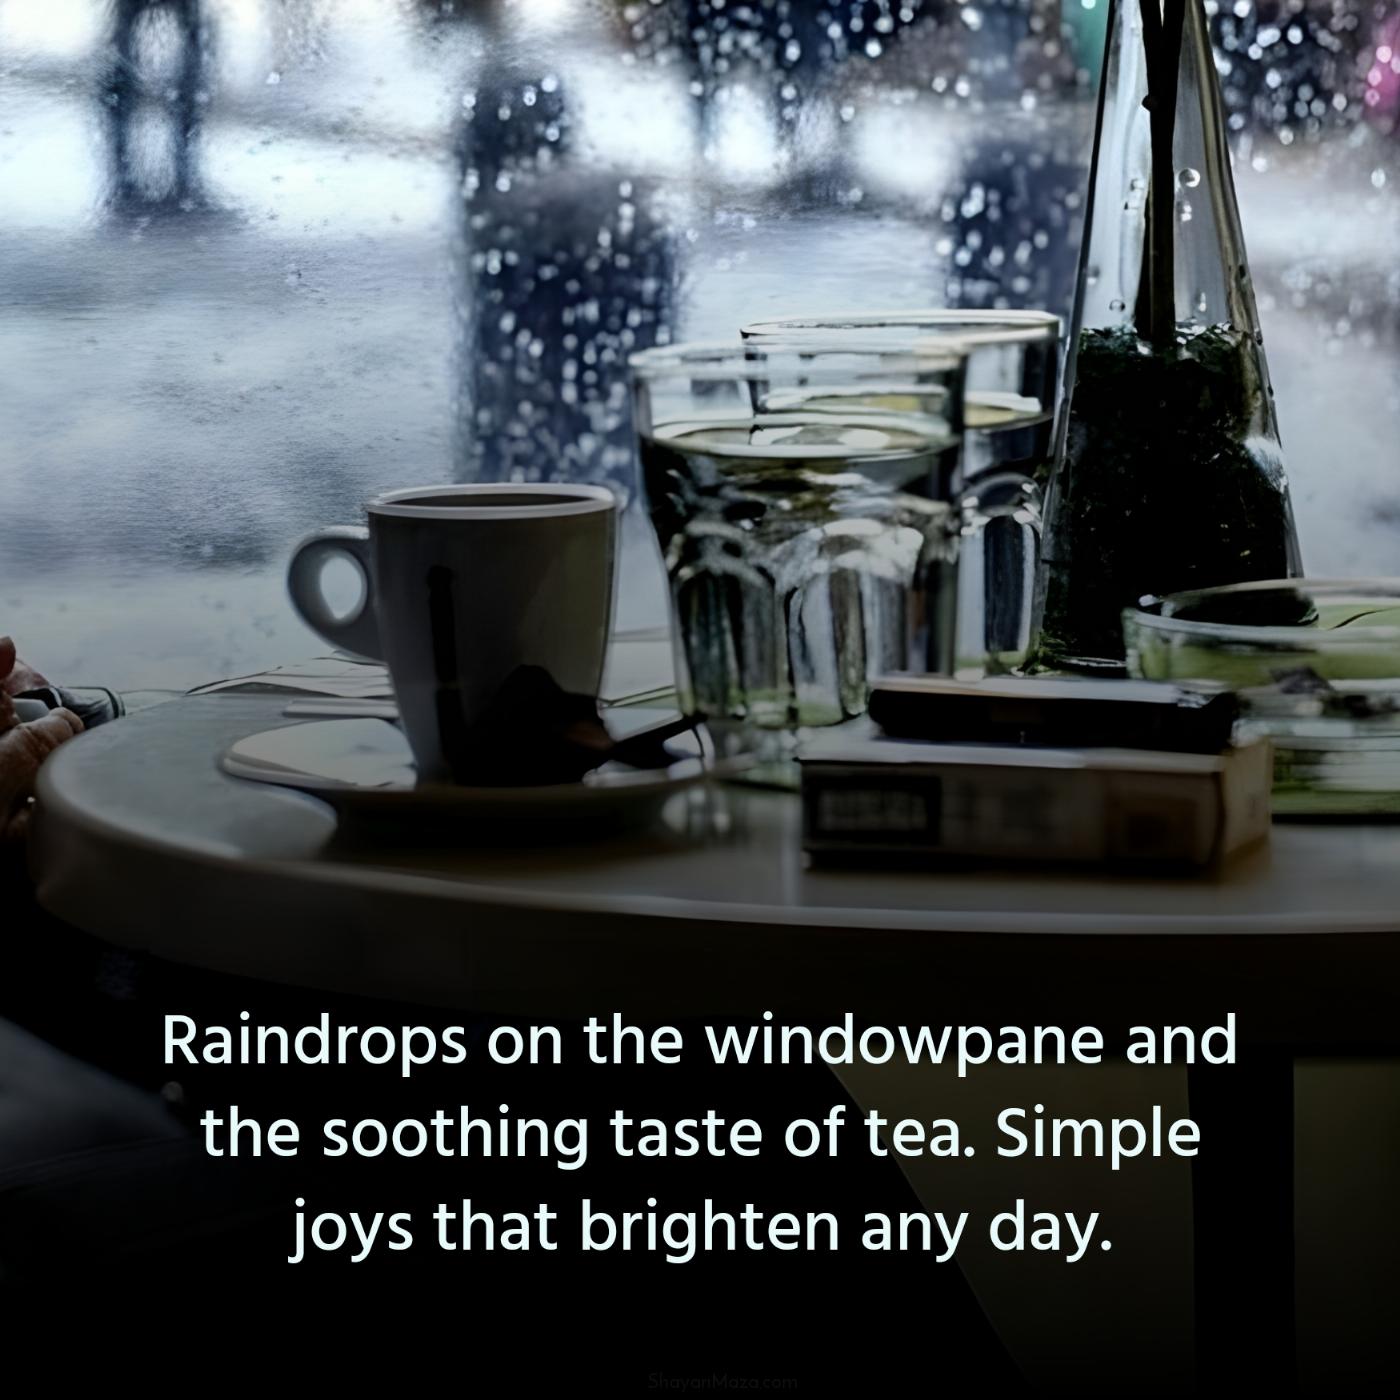 Raindrops on the windowpane and the soothing taste of tea